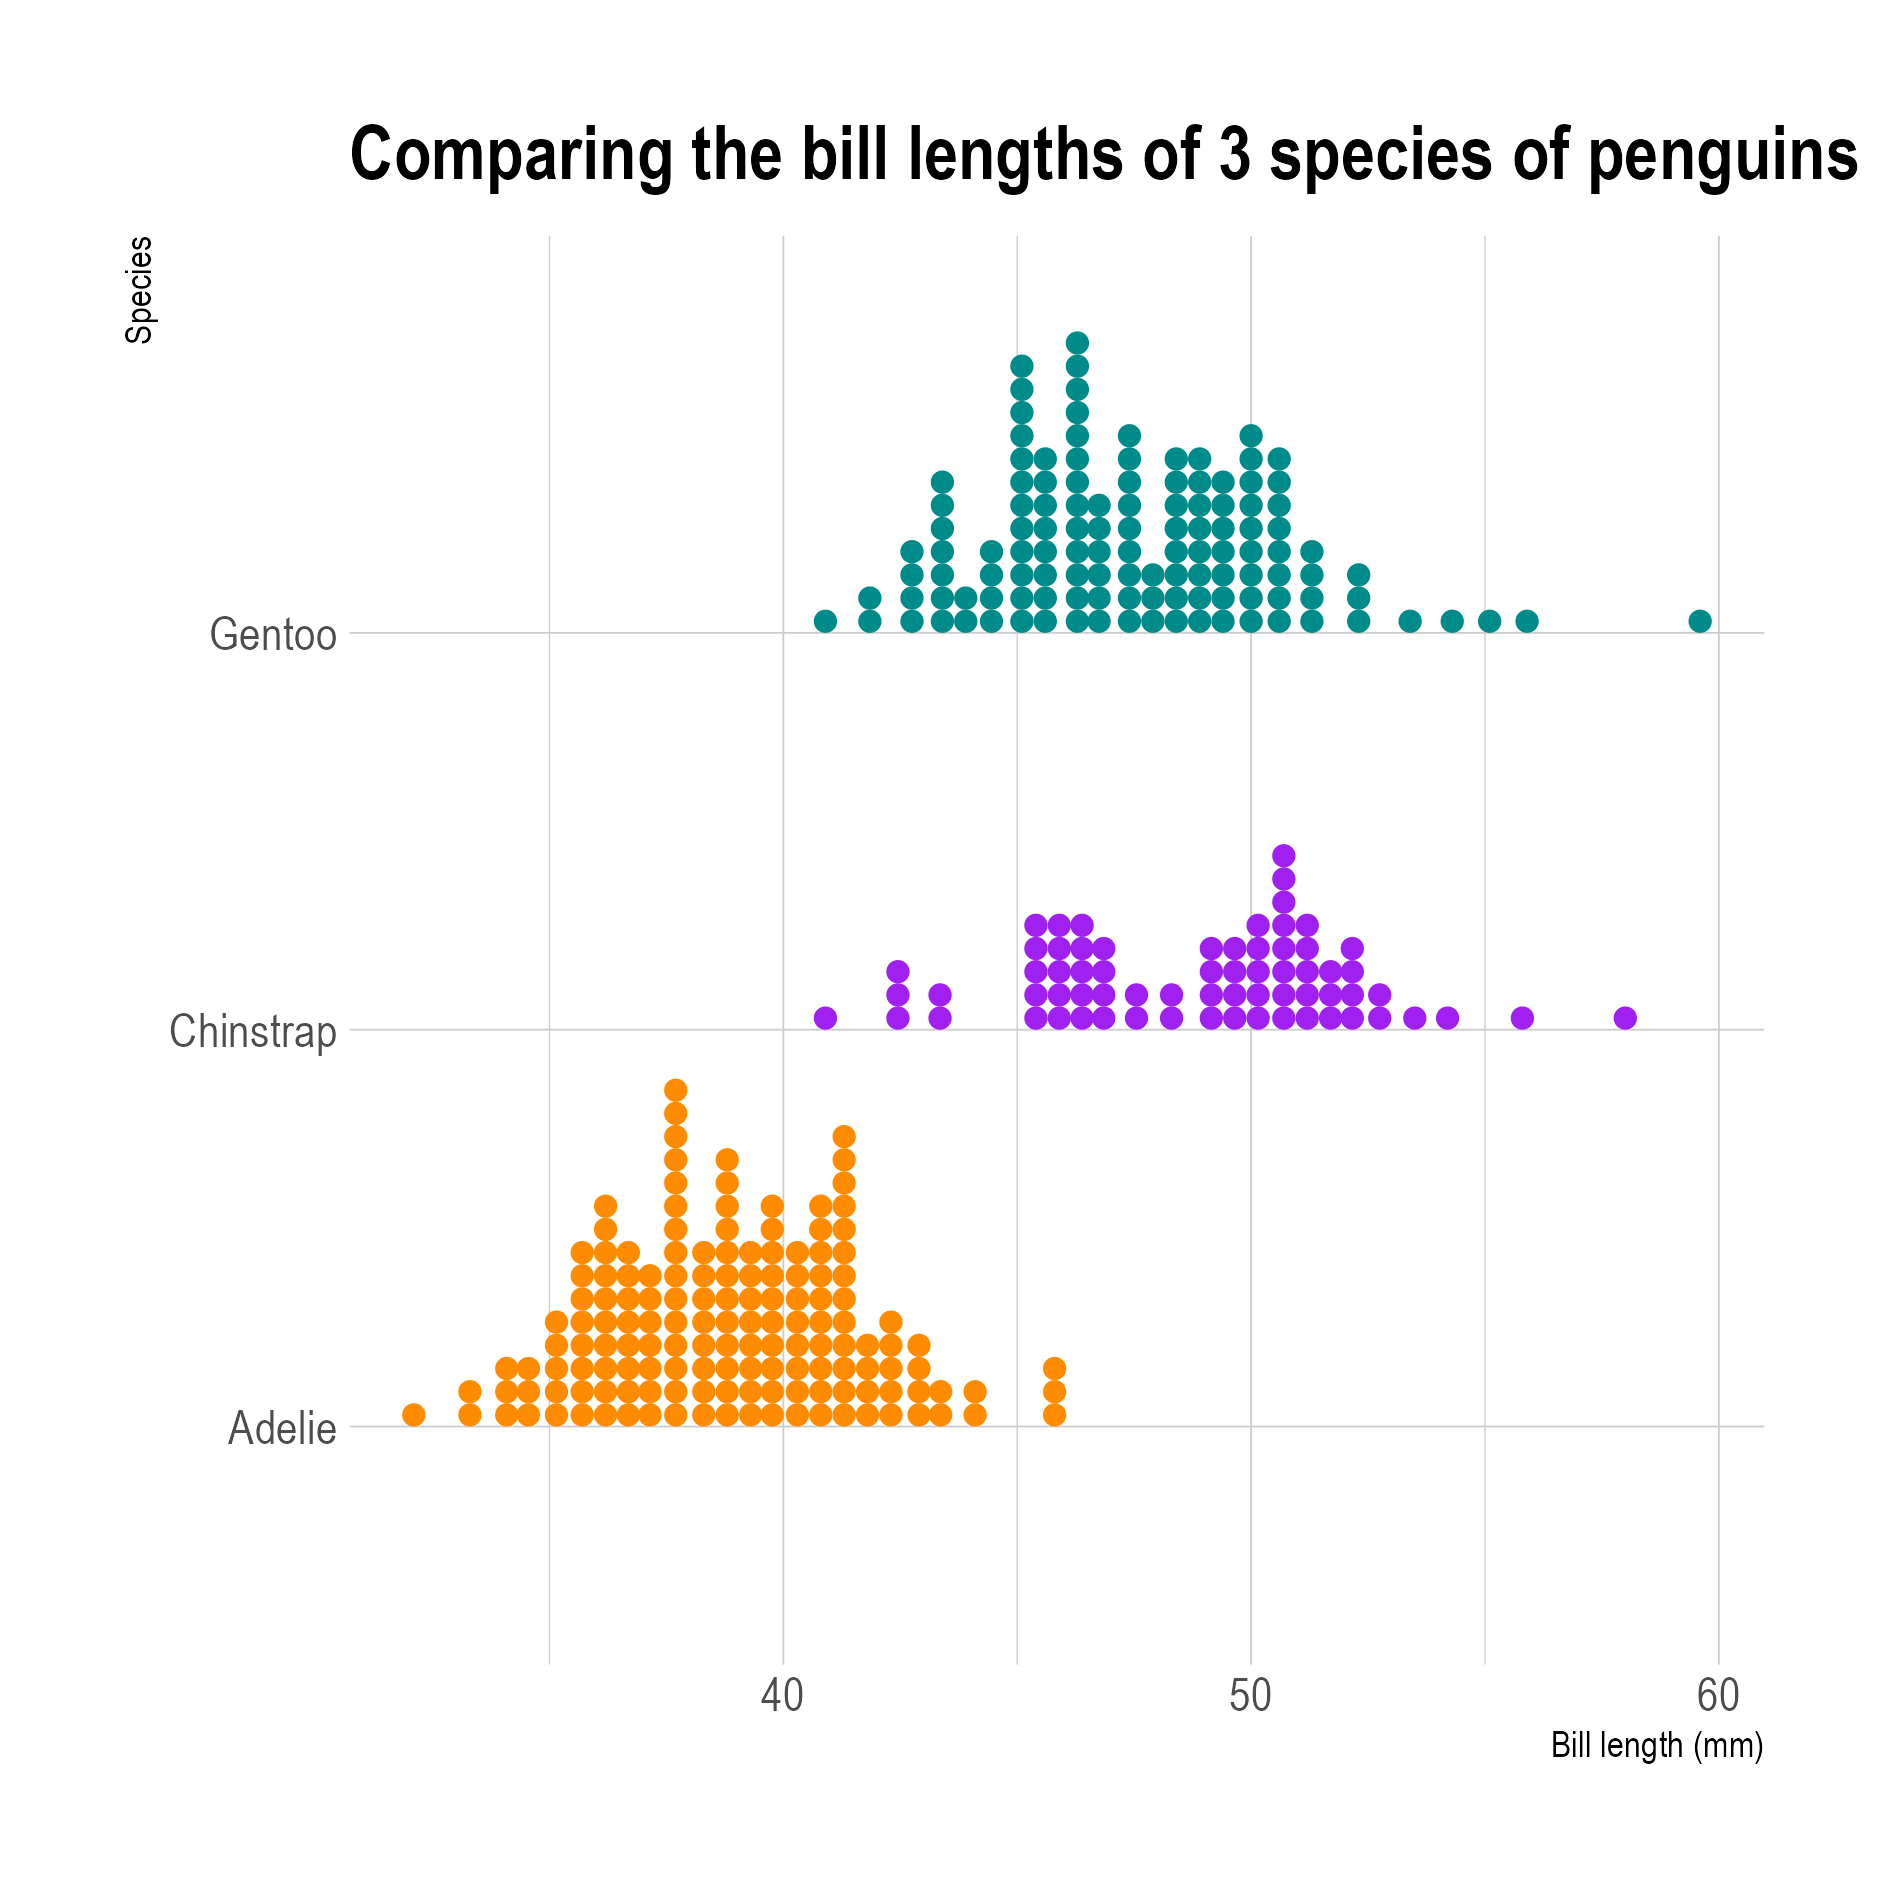 Dot plots comparing the distribution of the bill lengths of 3 species of penguins